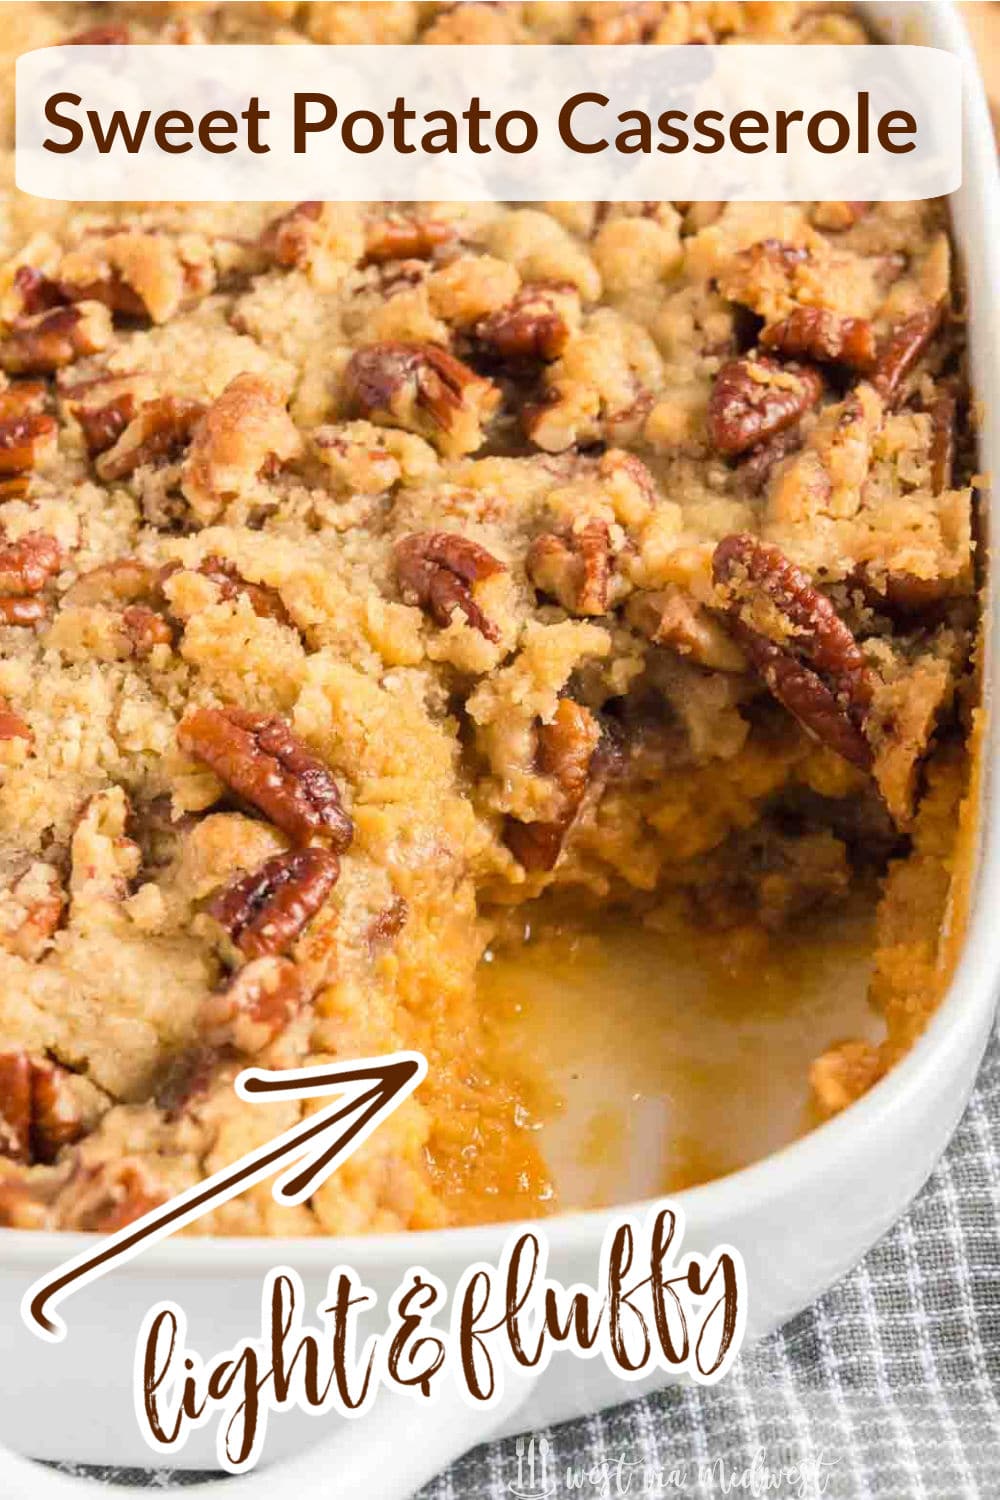 Sweet Potato Casserole with Canned Yams - West Via Midwest